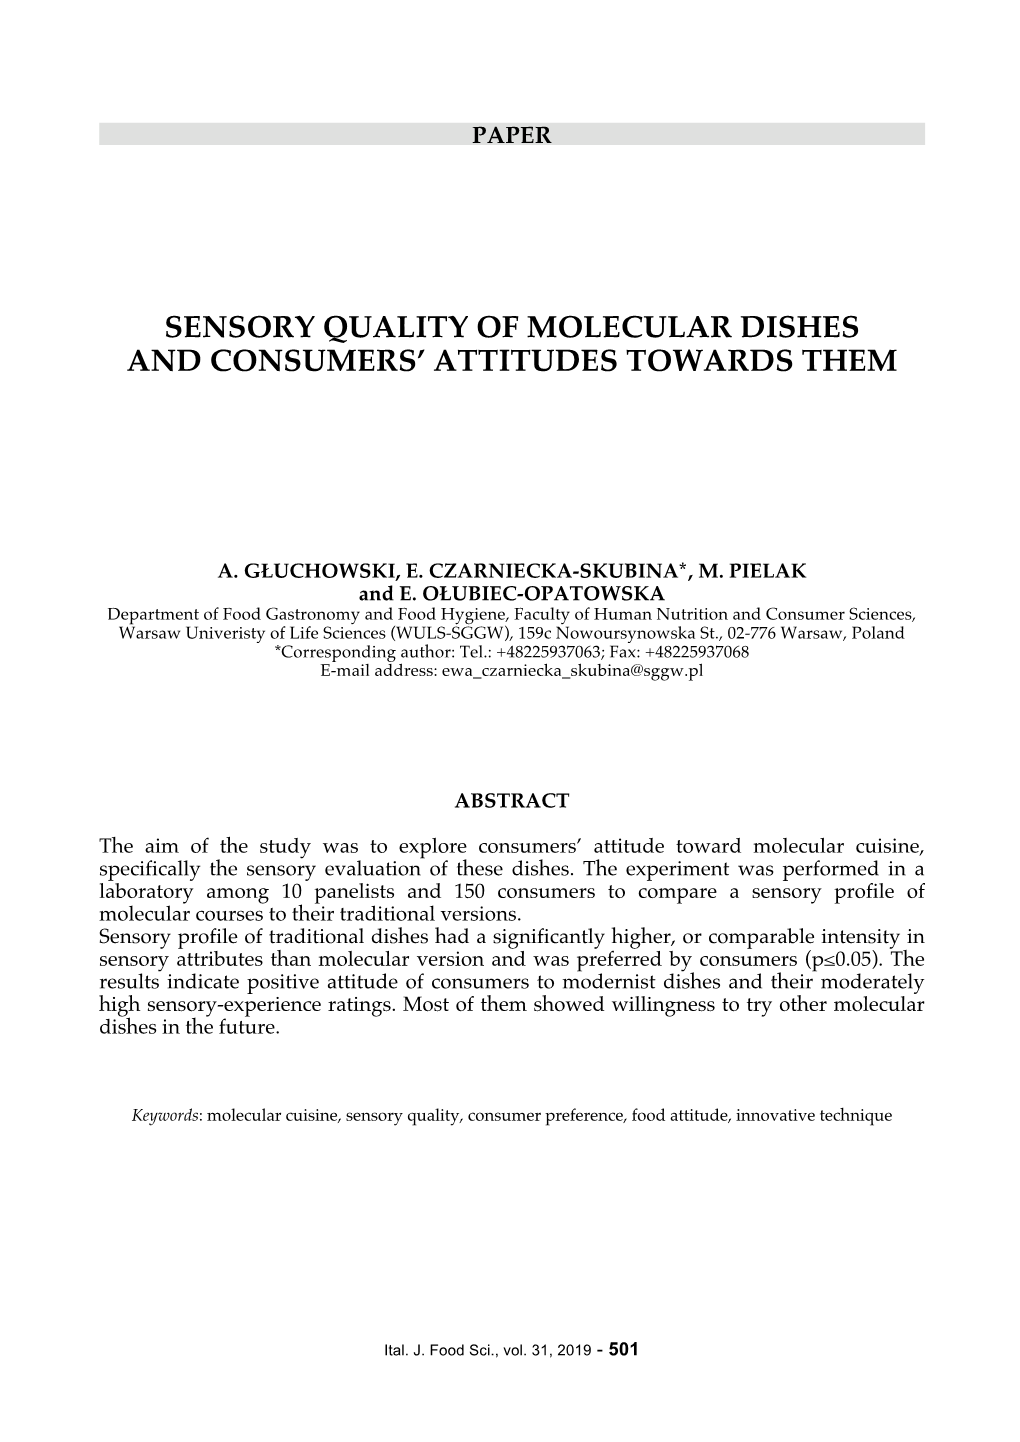 Sensory Quality of Molecular Dishes and Consumers' Attitudes Towards